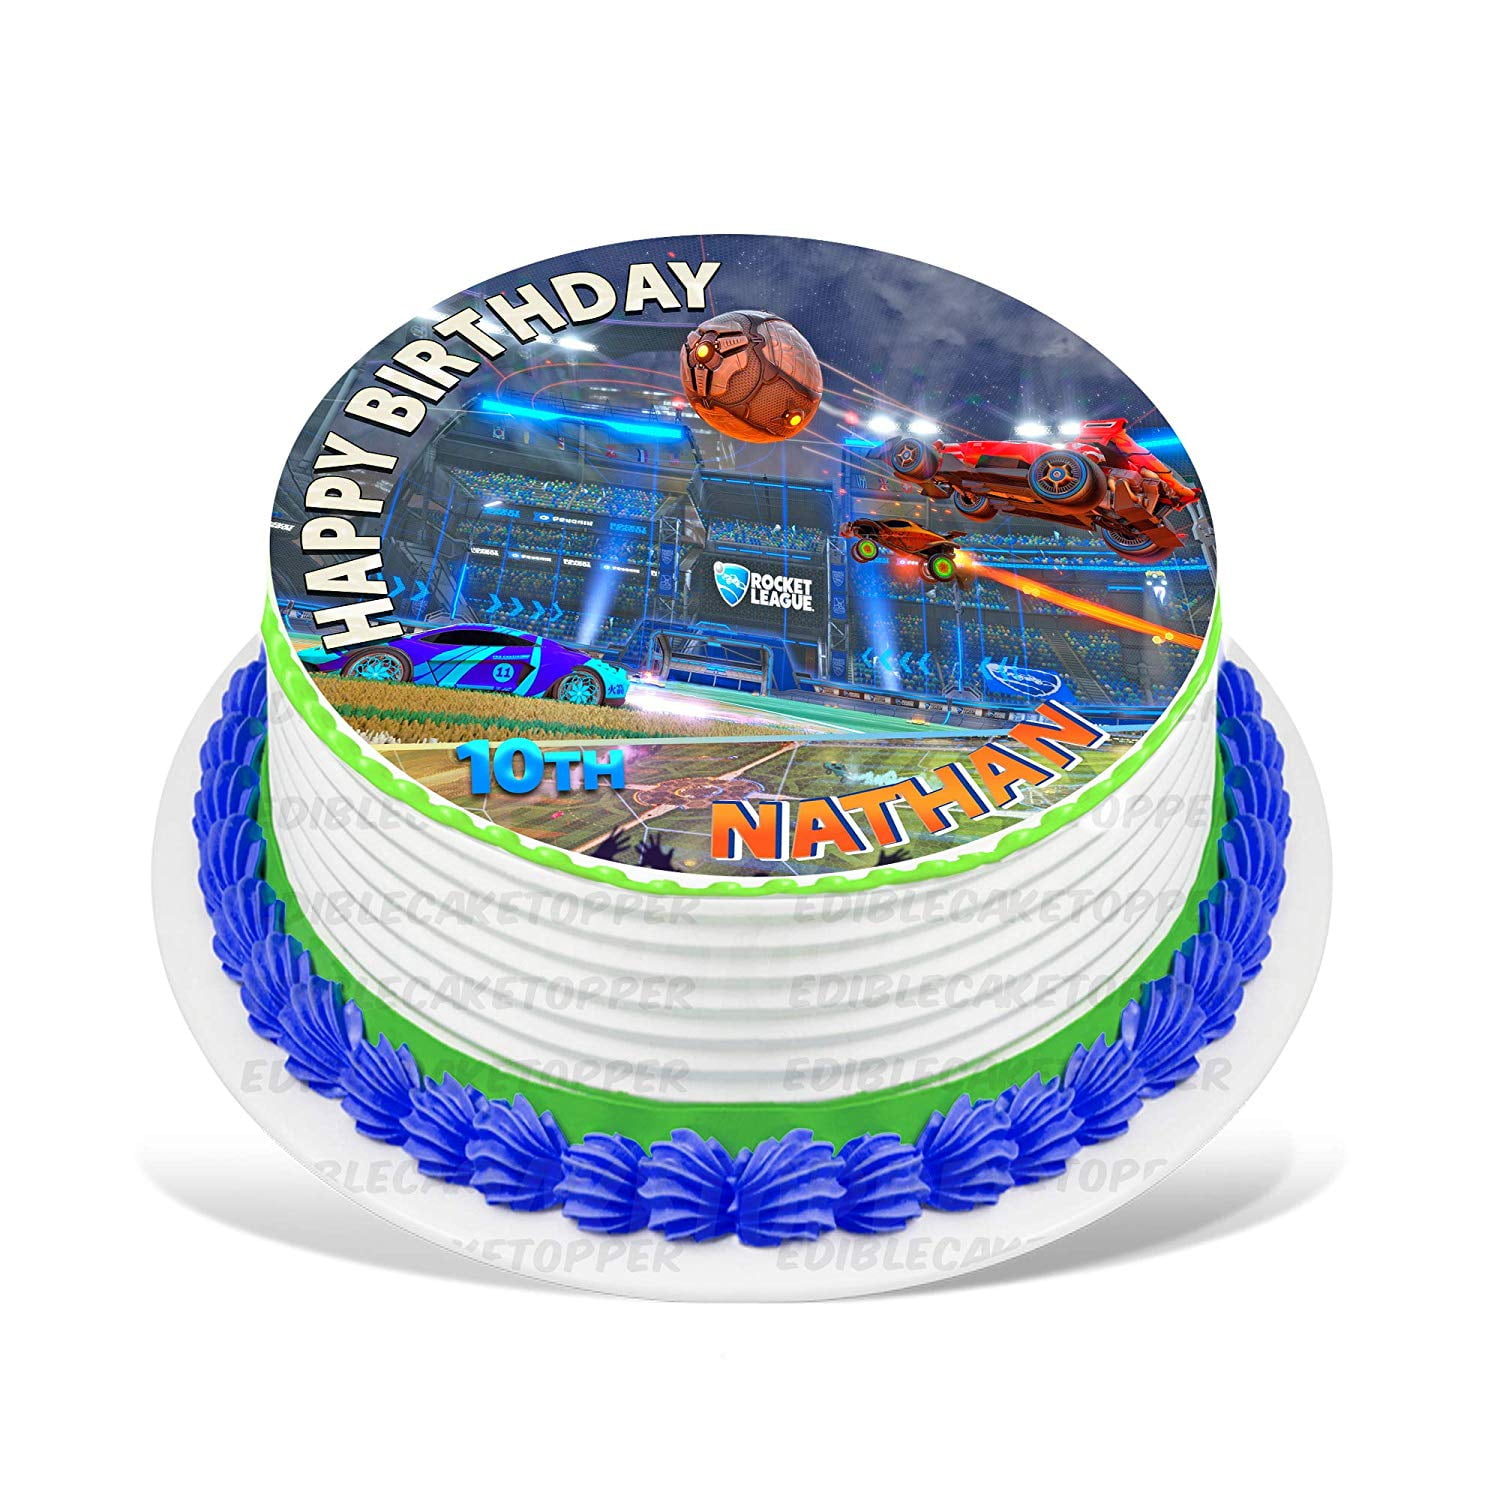 Details about   Rocket League Cake Topper Personalised Edible Icing 